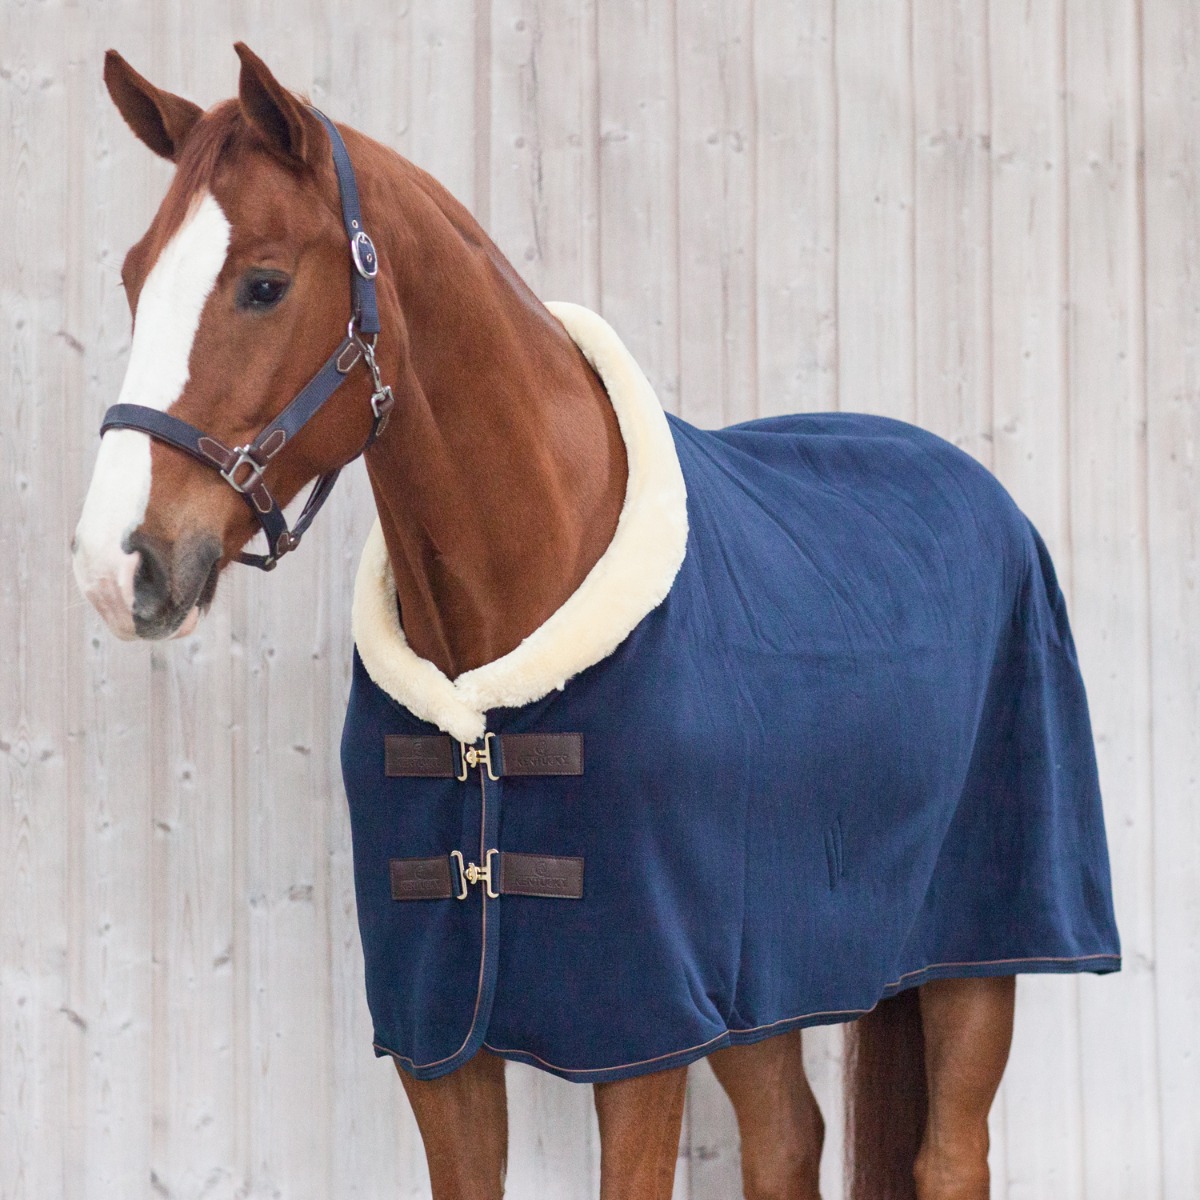 NEW Quality Elite Fleece Show Rug for Horse or Pony All Sizes FREE DELIVERY 